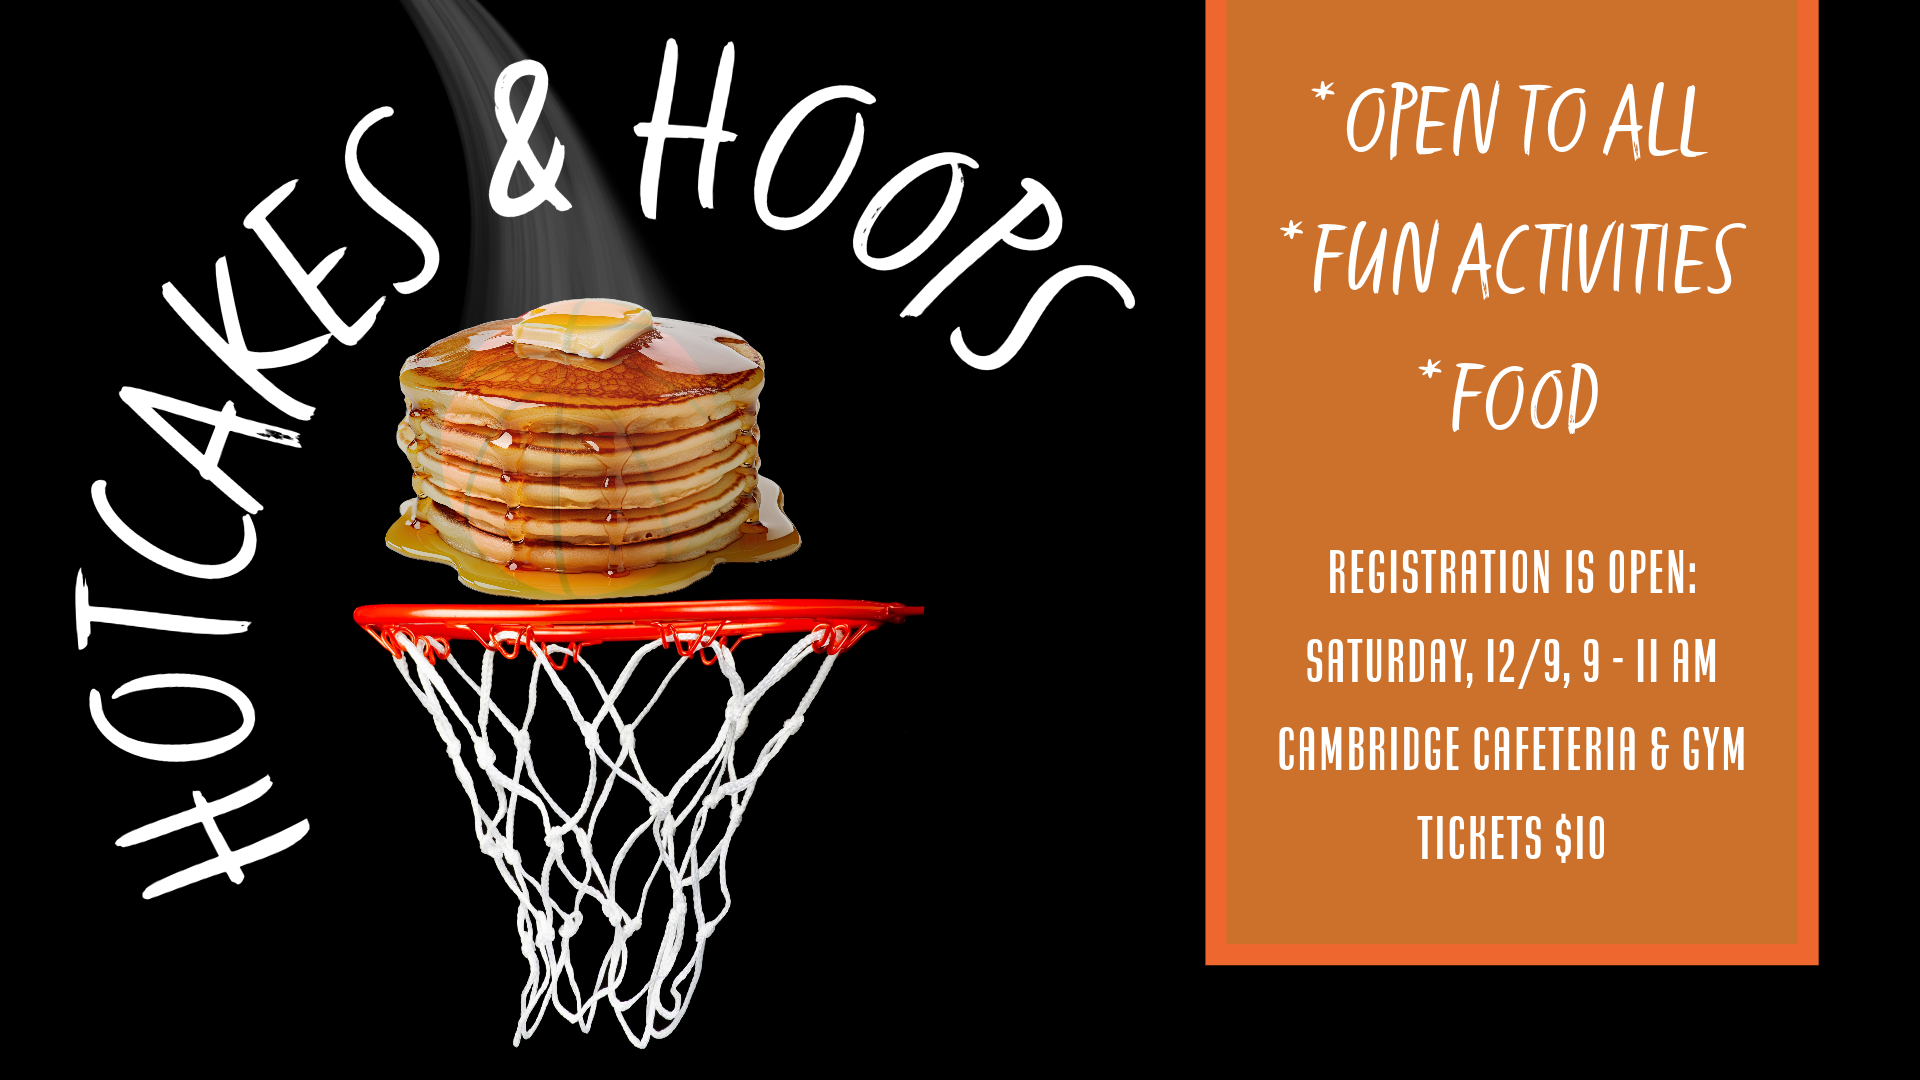 Register today for Hotcakes and Hoops on 12/9 from 9-11 am